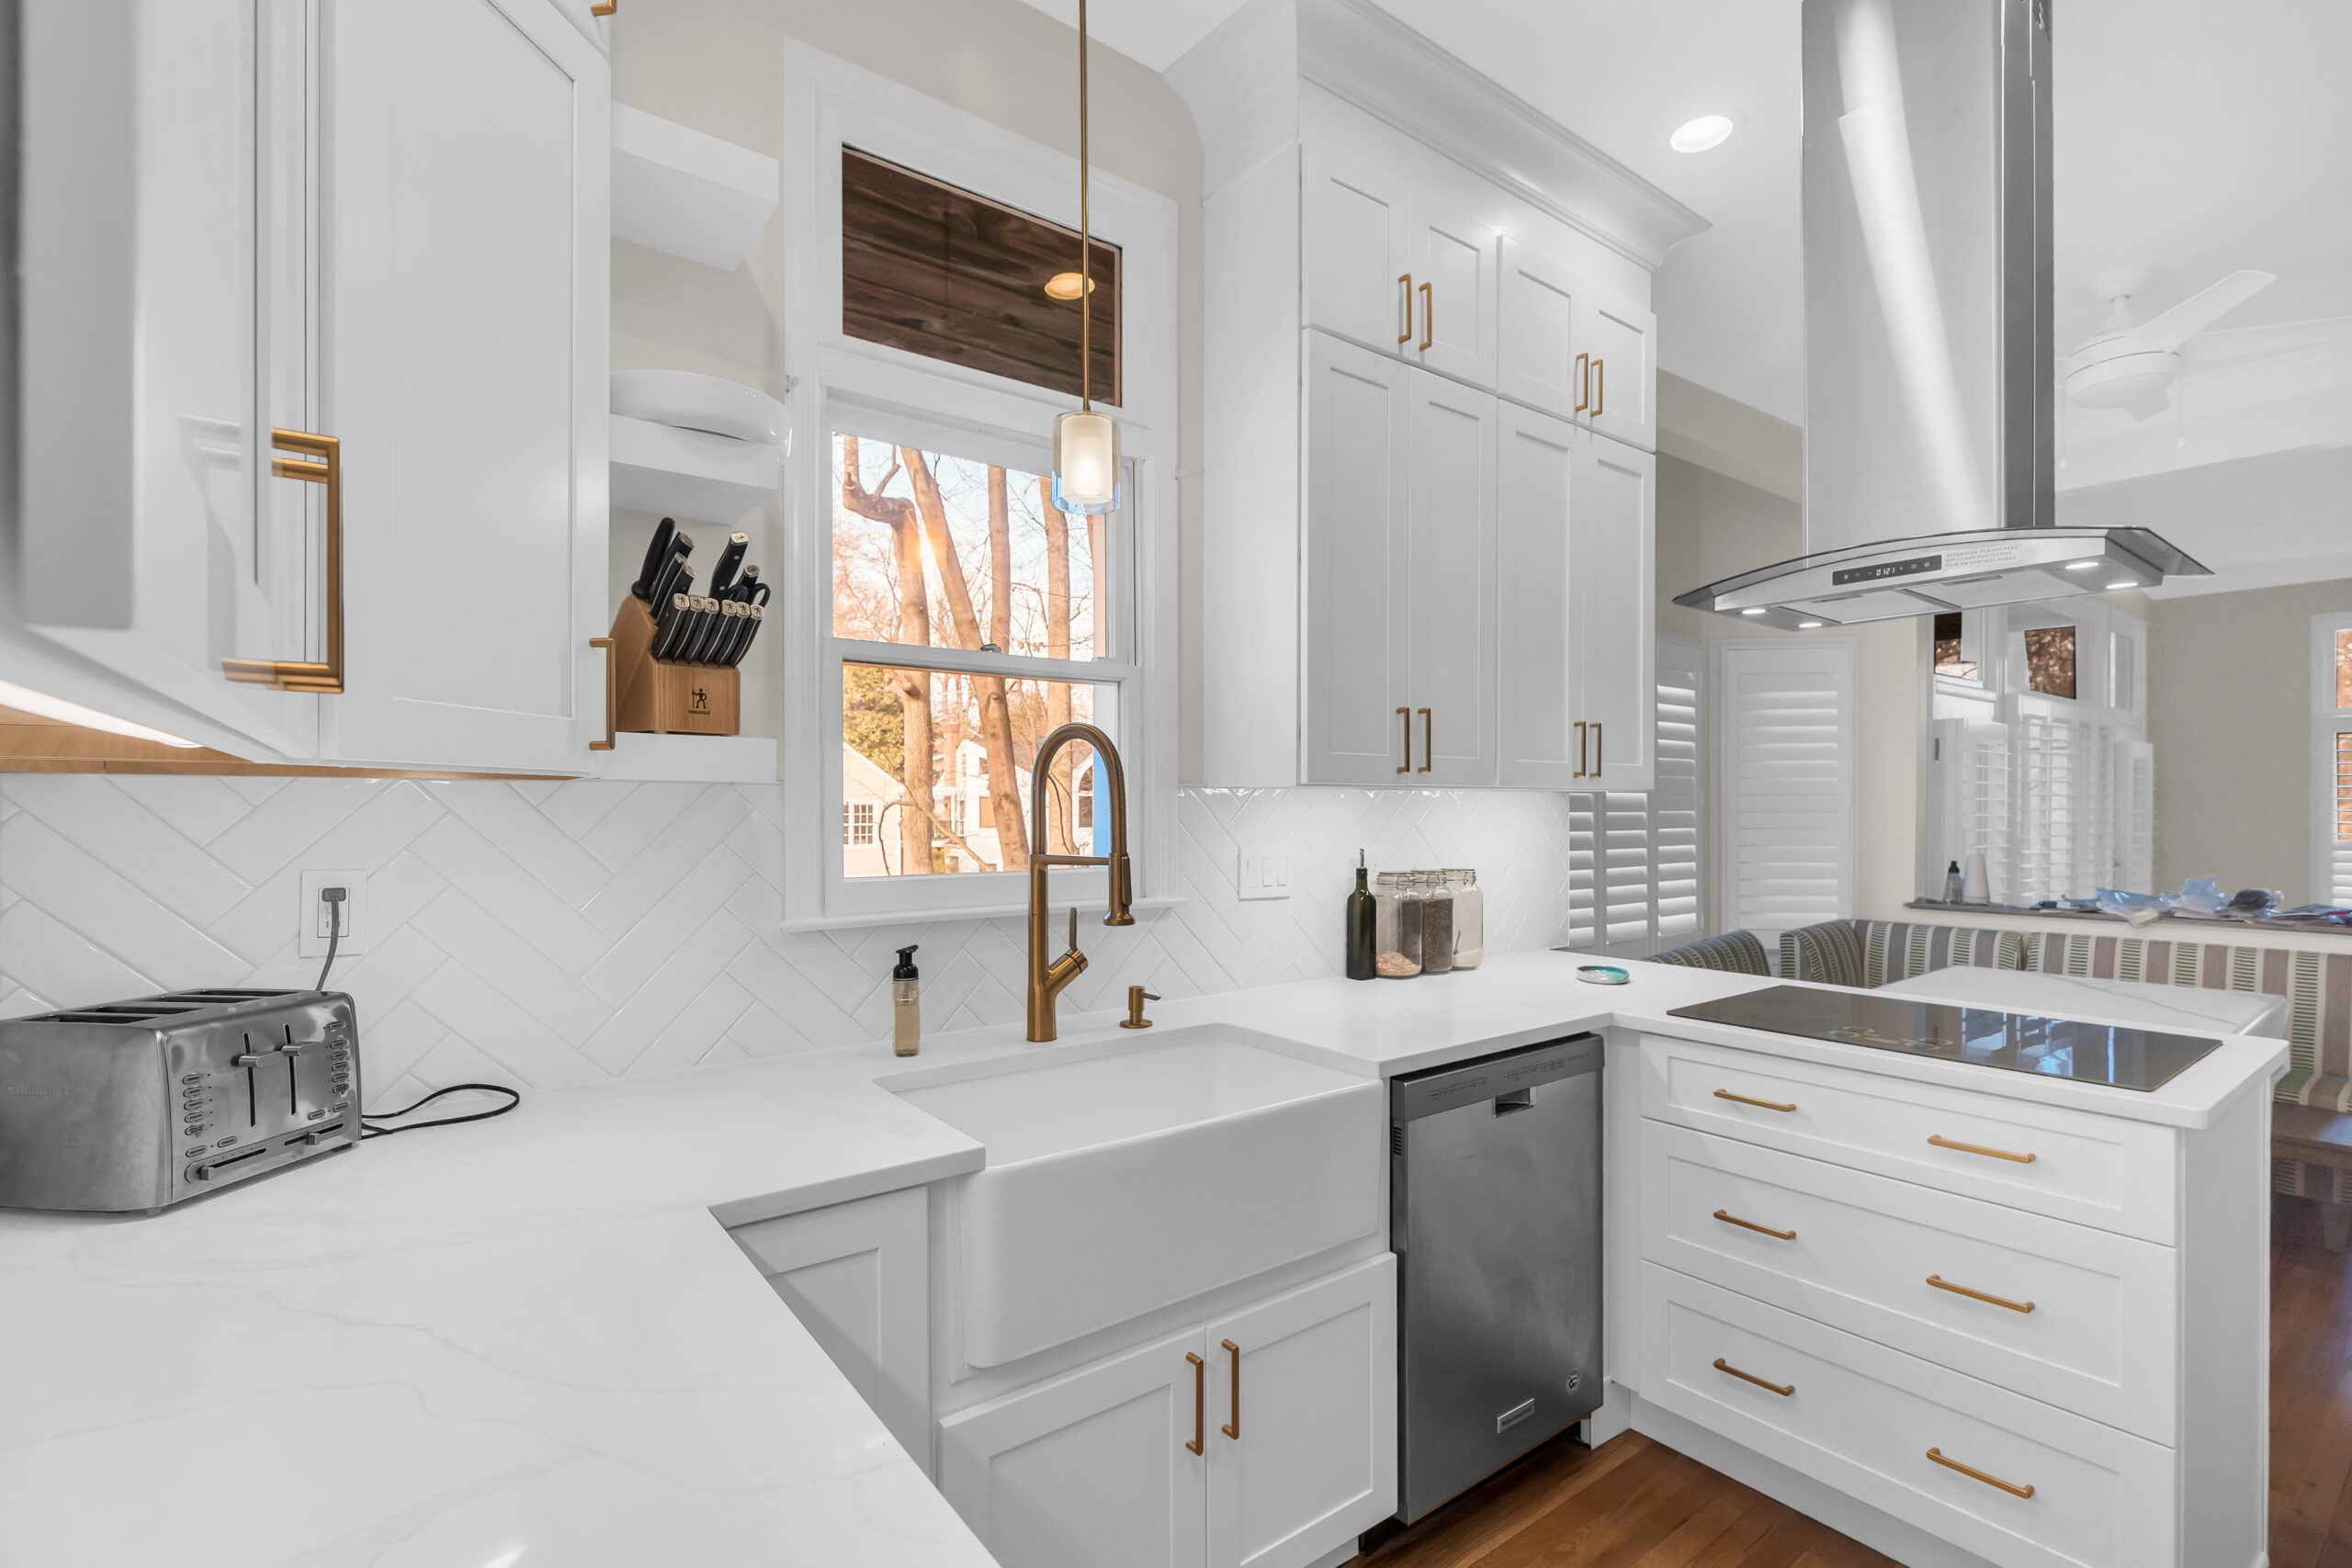 White kitchen design with shaker cabinets and wood flooring